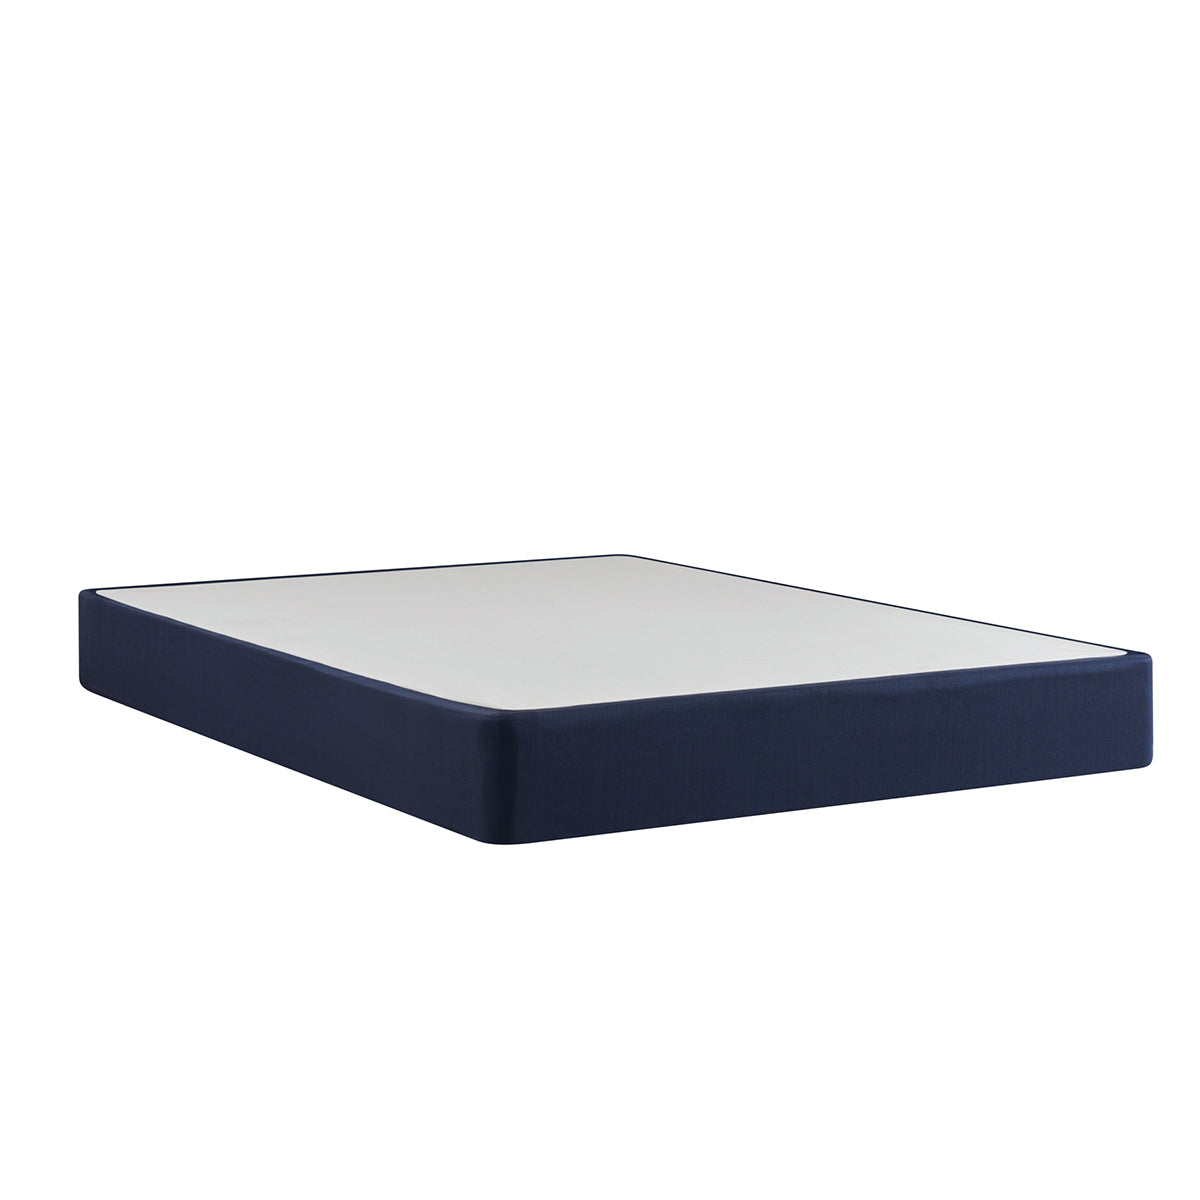 Stearns & Foster SX Box Spring Foundation